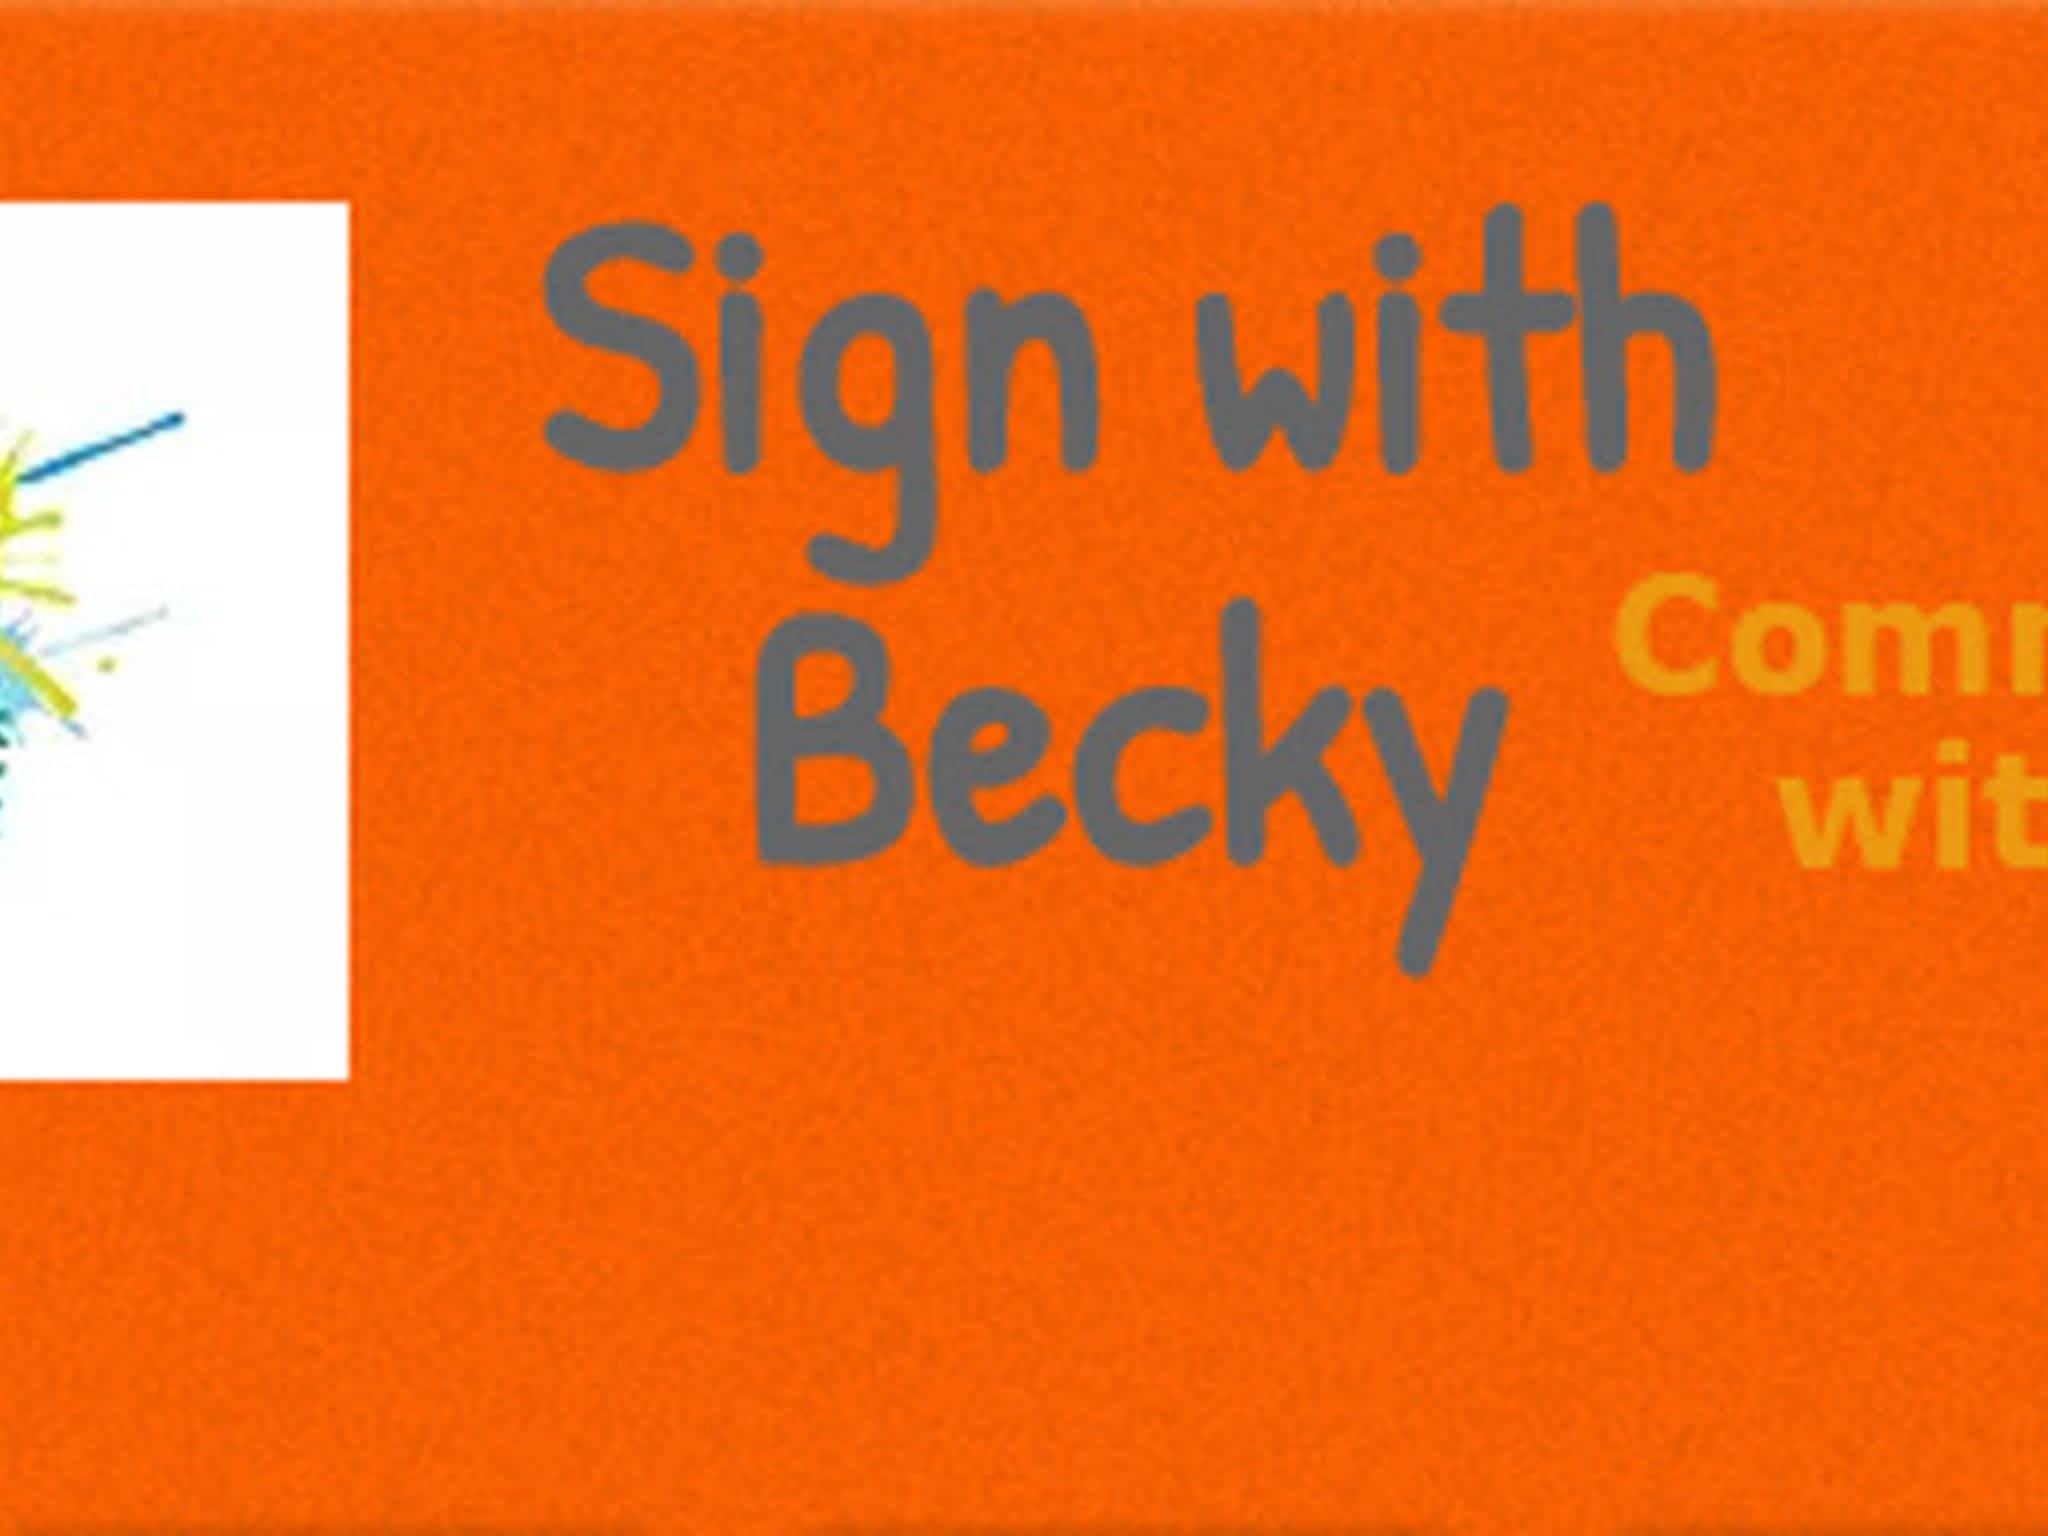 photo Sign With Becky